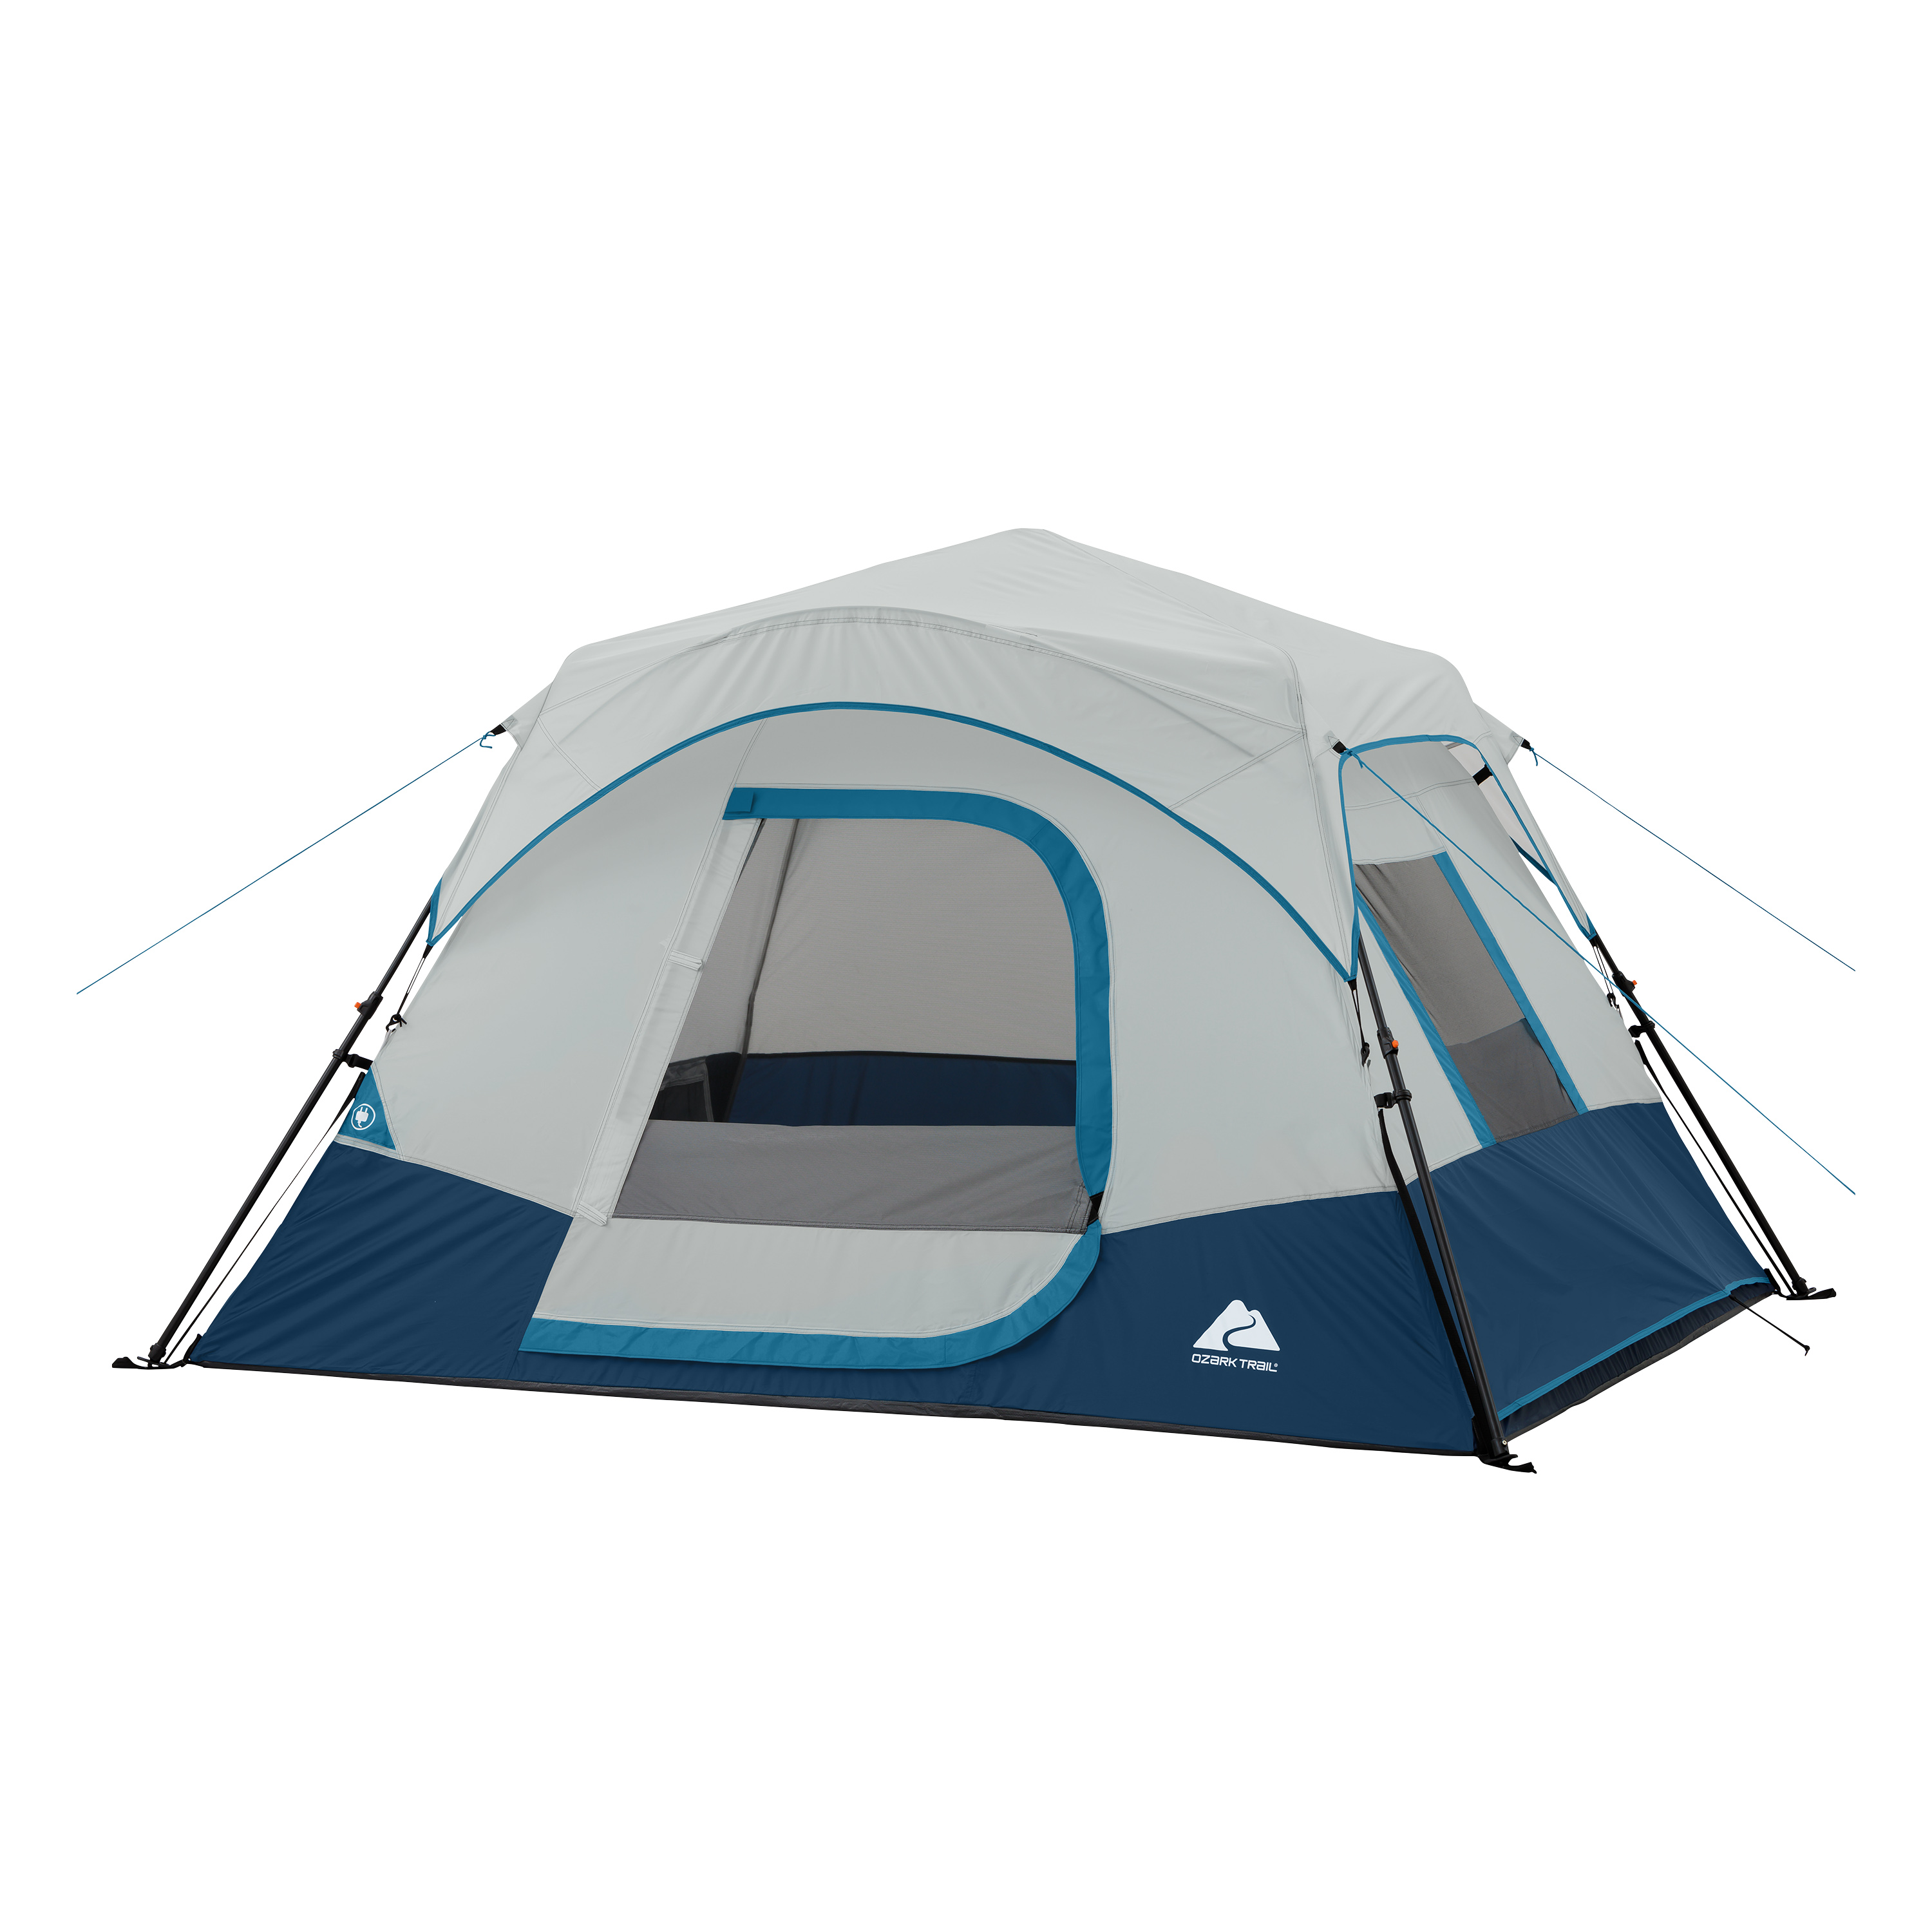 Ozark Trail 4 Piece, Tent, Chair and Table Camping Combo - image 2 of 15